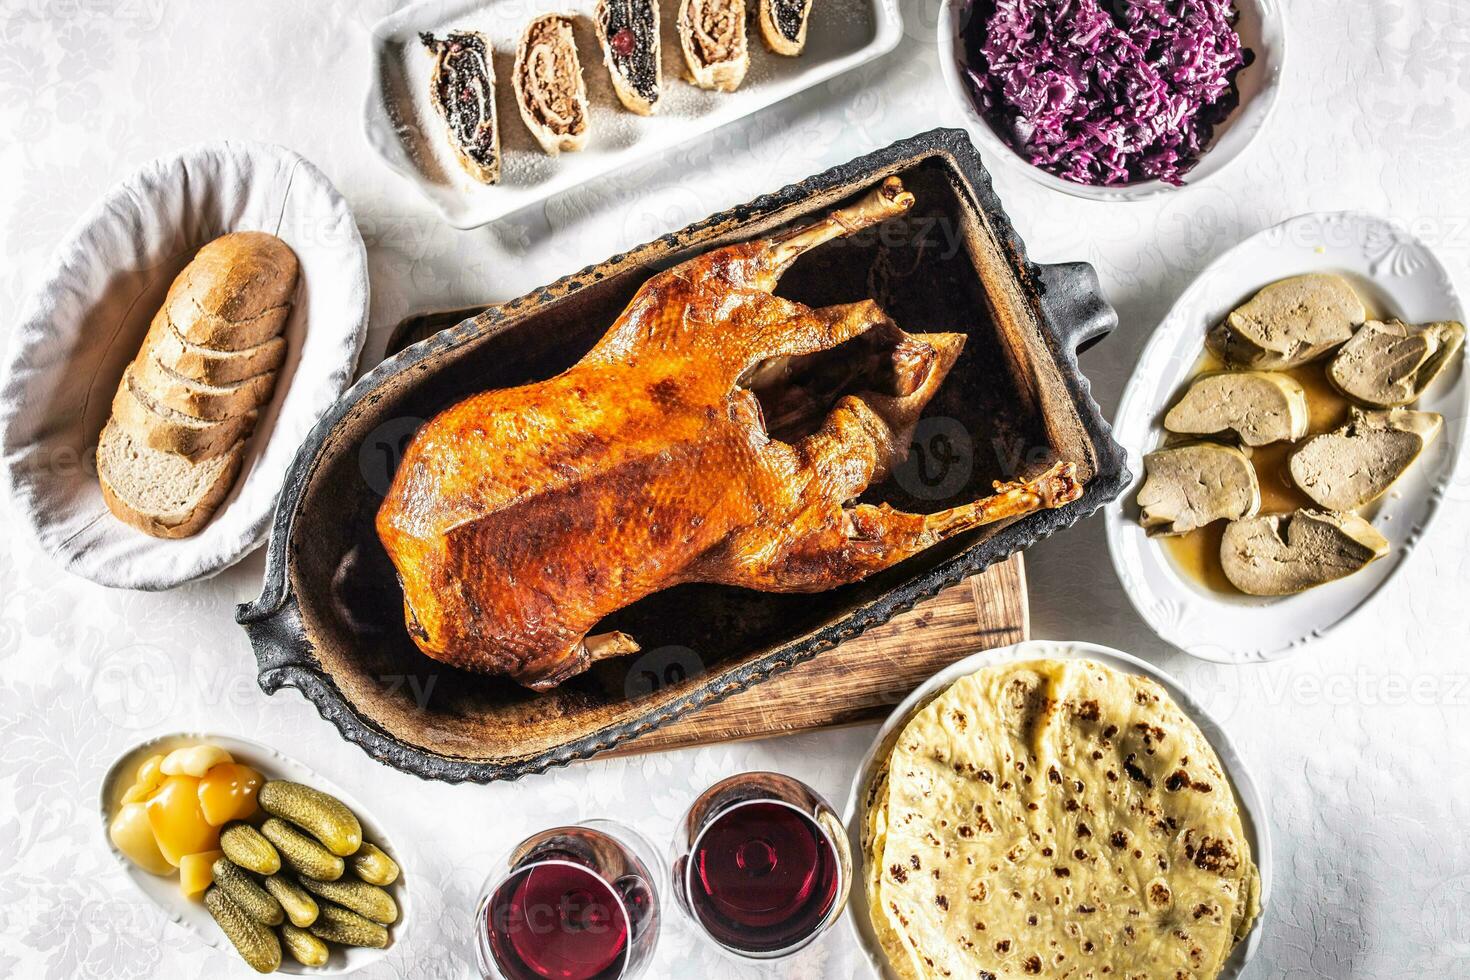 Roast goose with side dishes, red cabbage, roast, strudel, potato dumplings, pickles, bread and red wine. Traditional holiday food. Top view photo